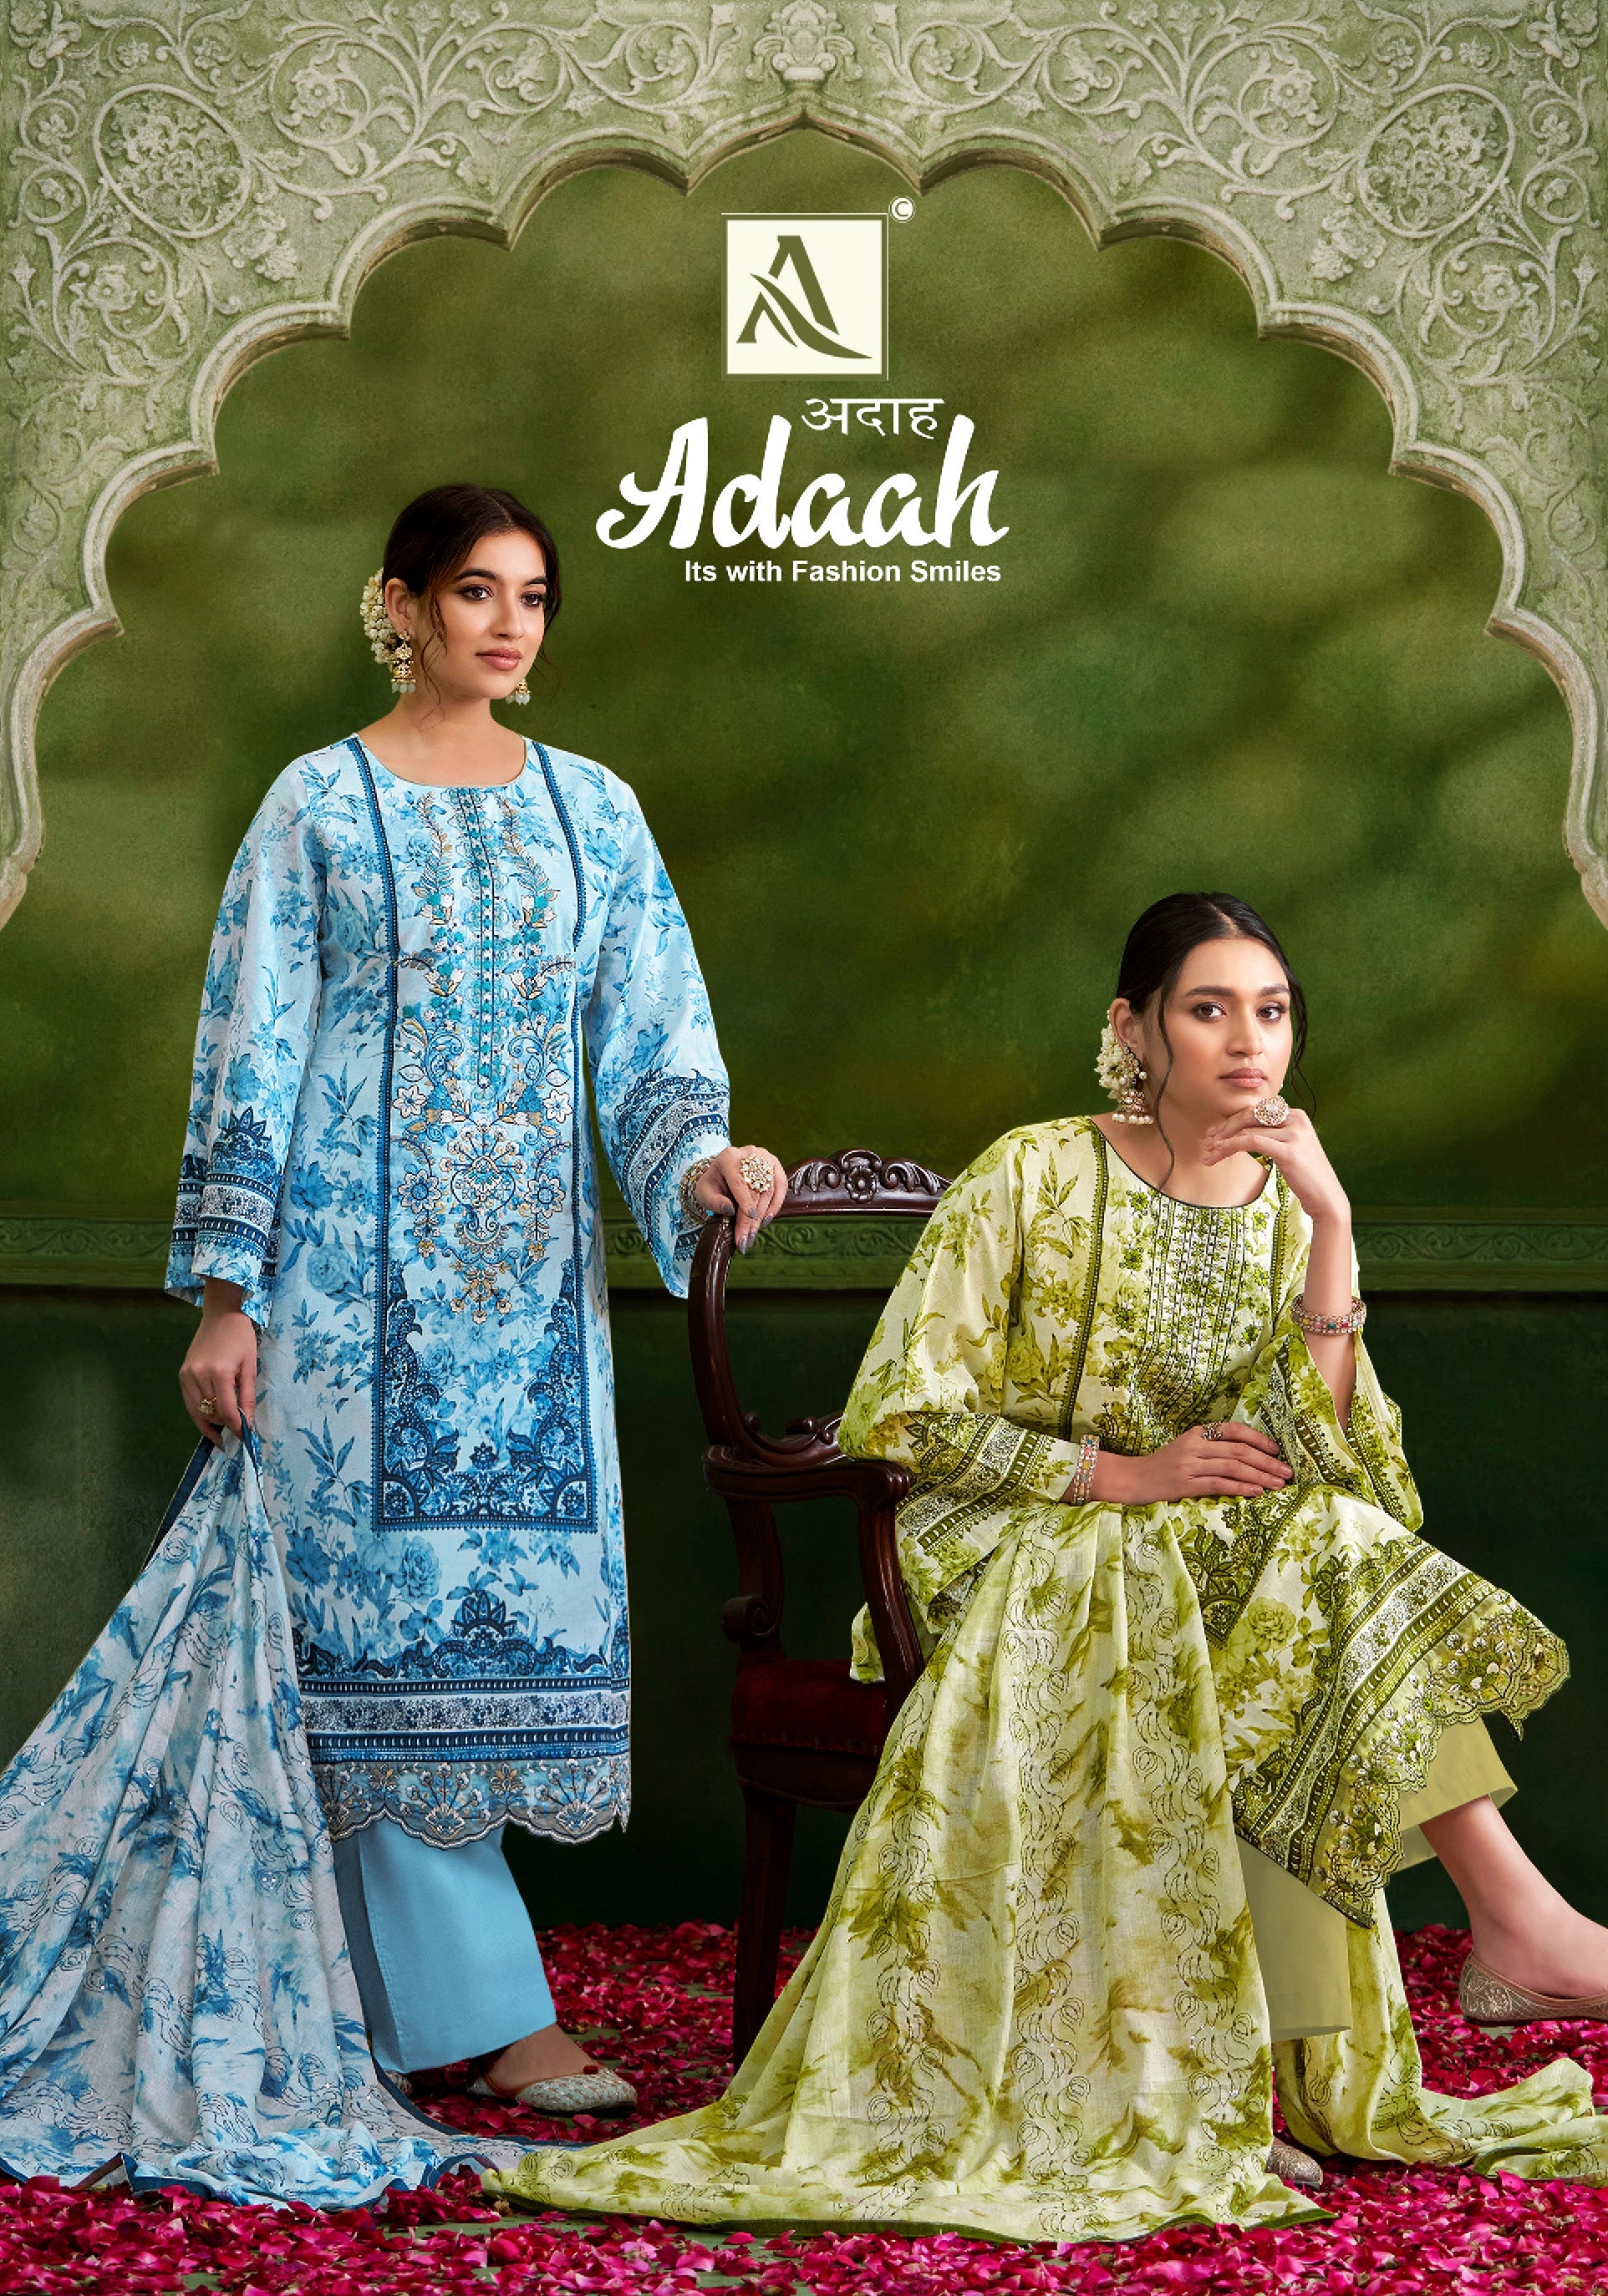 Alok Suit Adaah Cambric Cotton Digital Print With Embroidery Work Salwar Suits Latest Collection - jilaniwholesalesuit